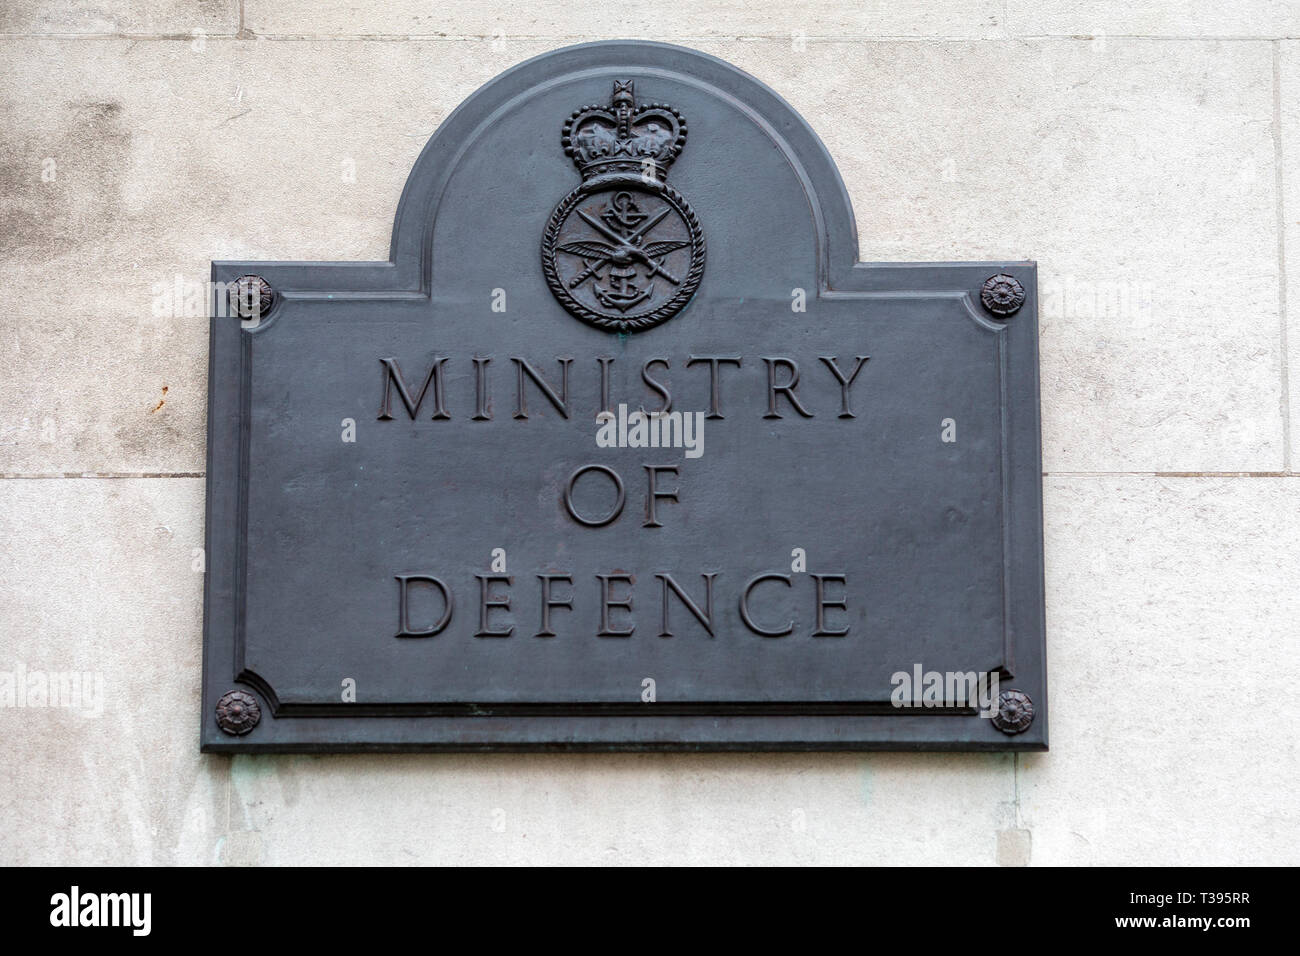 Ministry of Defence Building, London, Friday, March 22, 2019.Photo: David Rowland / One-Image.com Stock Photo